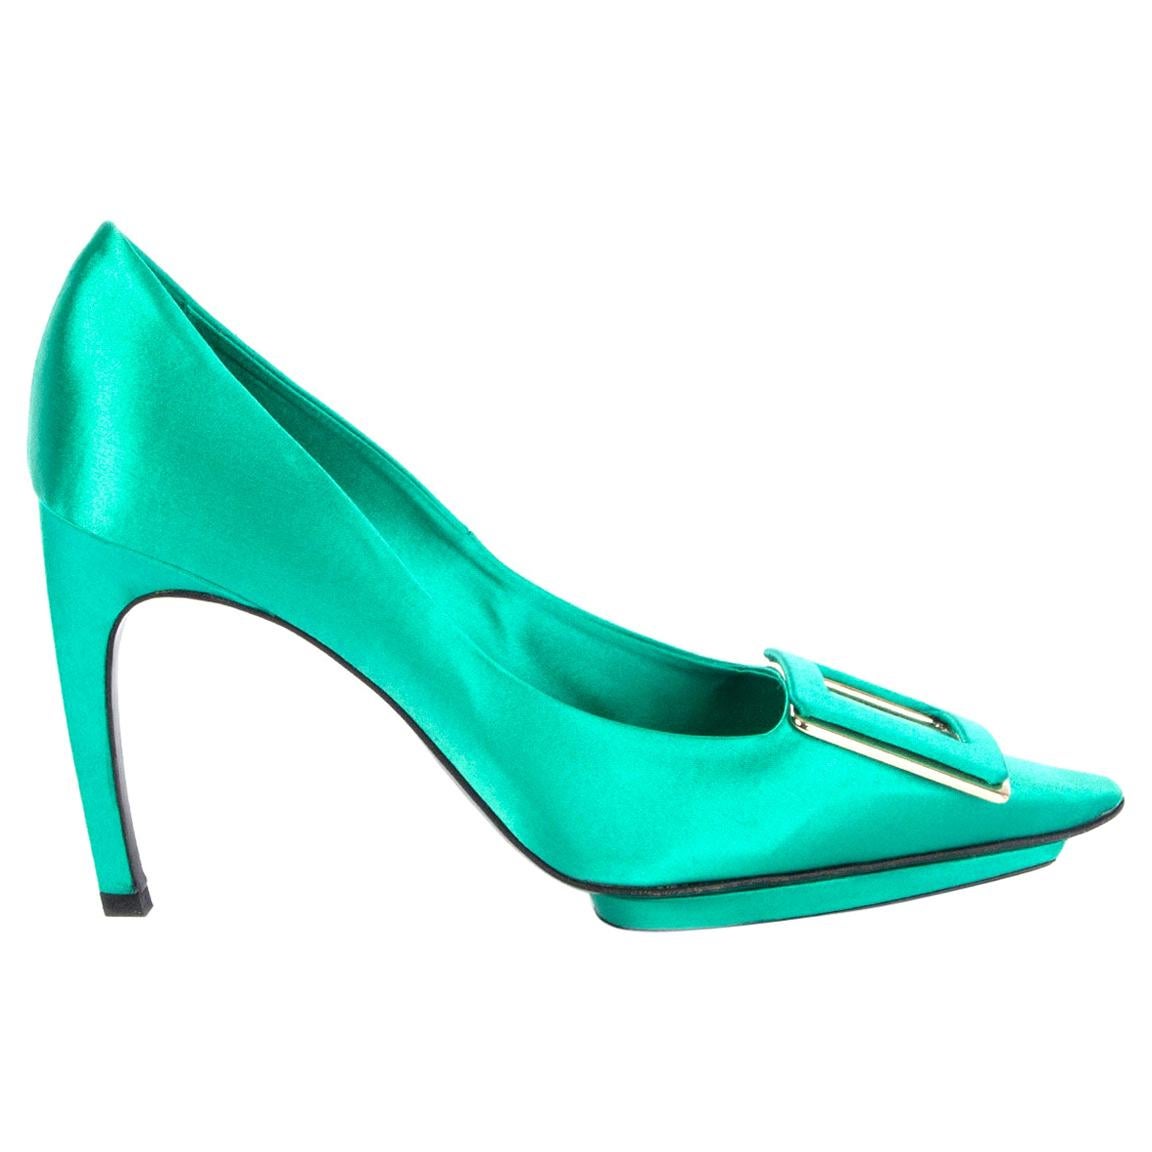 ROGER VIVIER mint green satin Pointed-Toe Buckle Pumps Shoes 38 For Sale